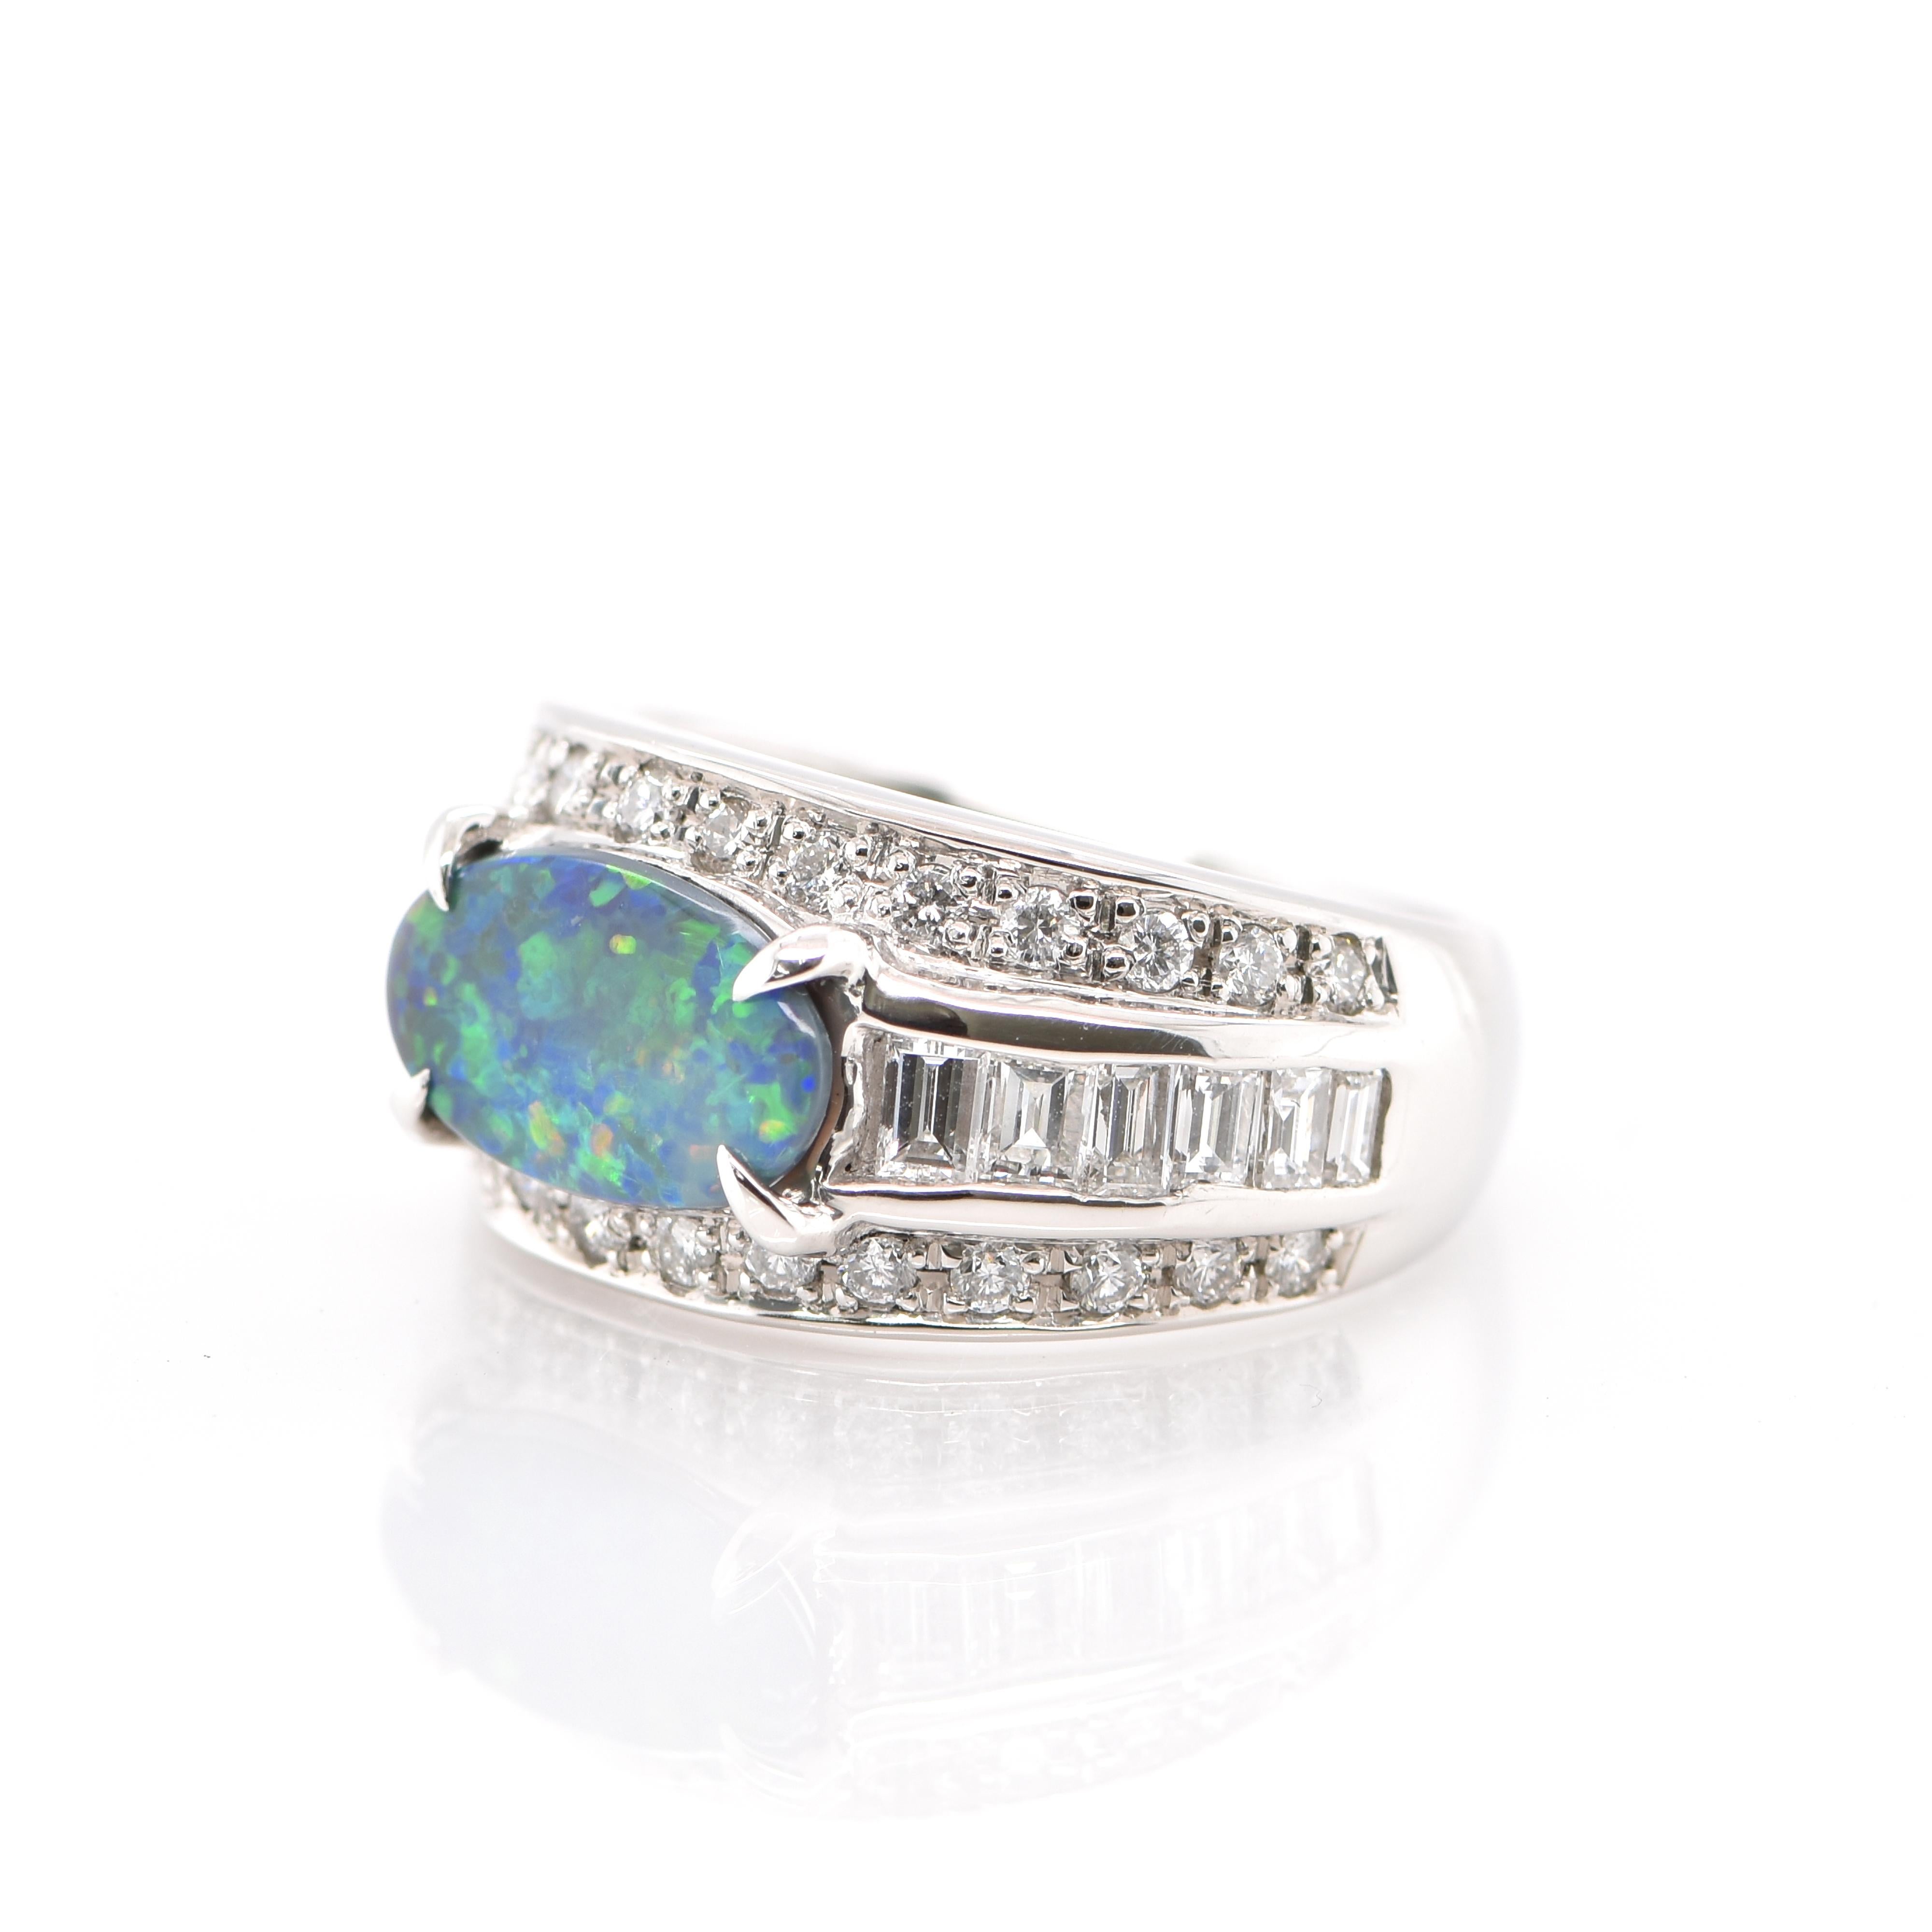 A beautiful Cocktail Ring featuring a 1.24 Carat Natural Australian Black Opal and 1.97 Carats of Diamond Accents set in Platinum. Opals are known for exhibiting flashes of rainbow colors known as 